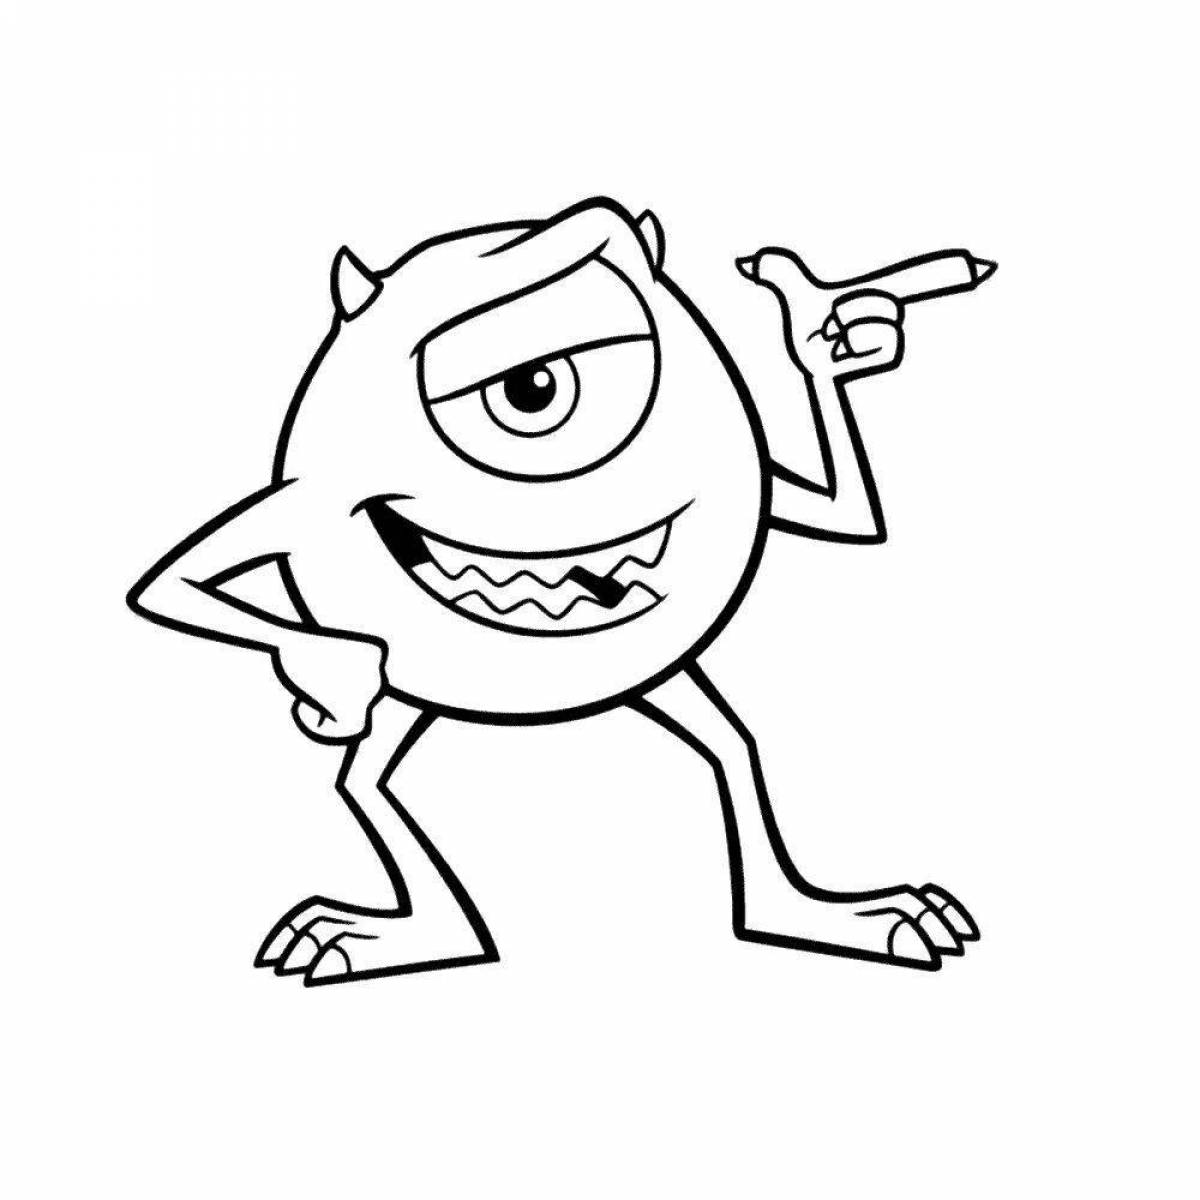 Animated joke coloring pages